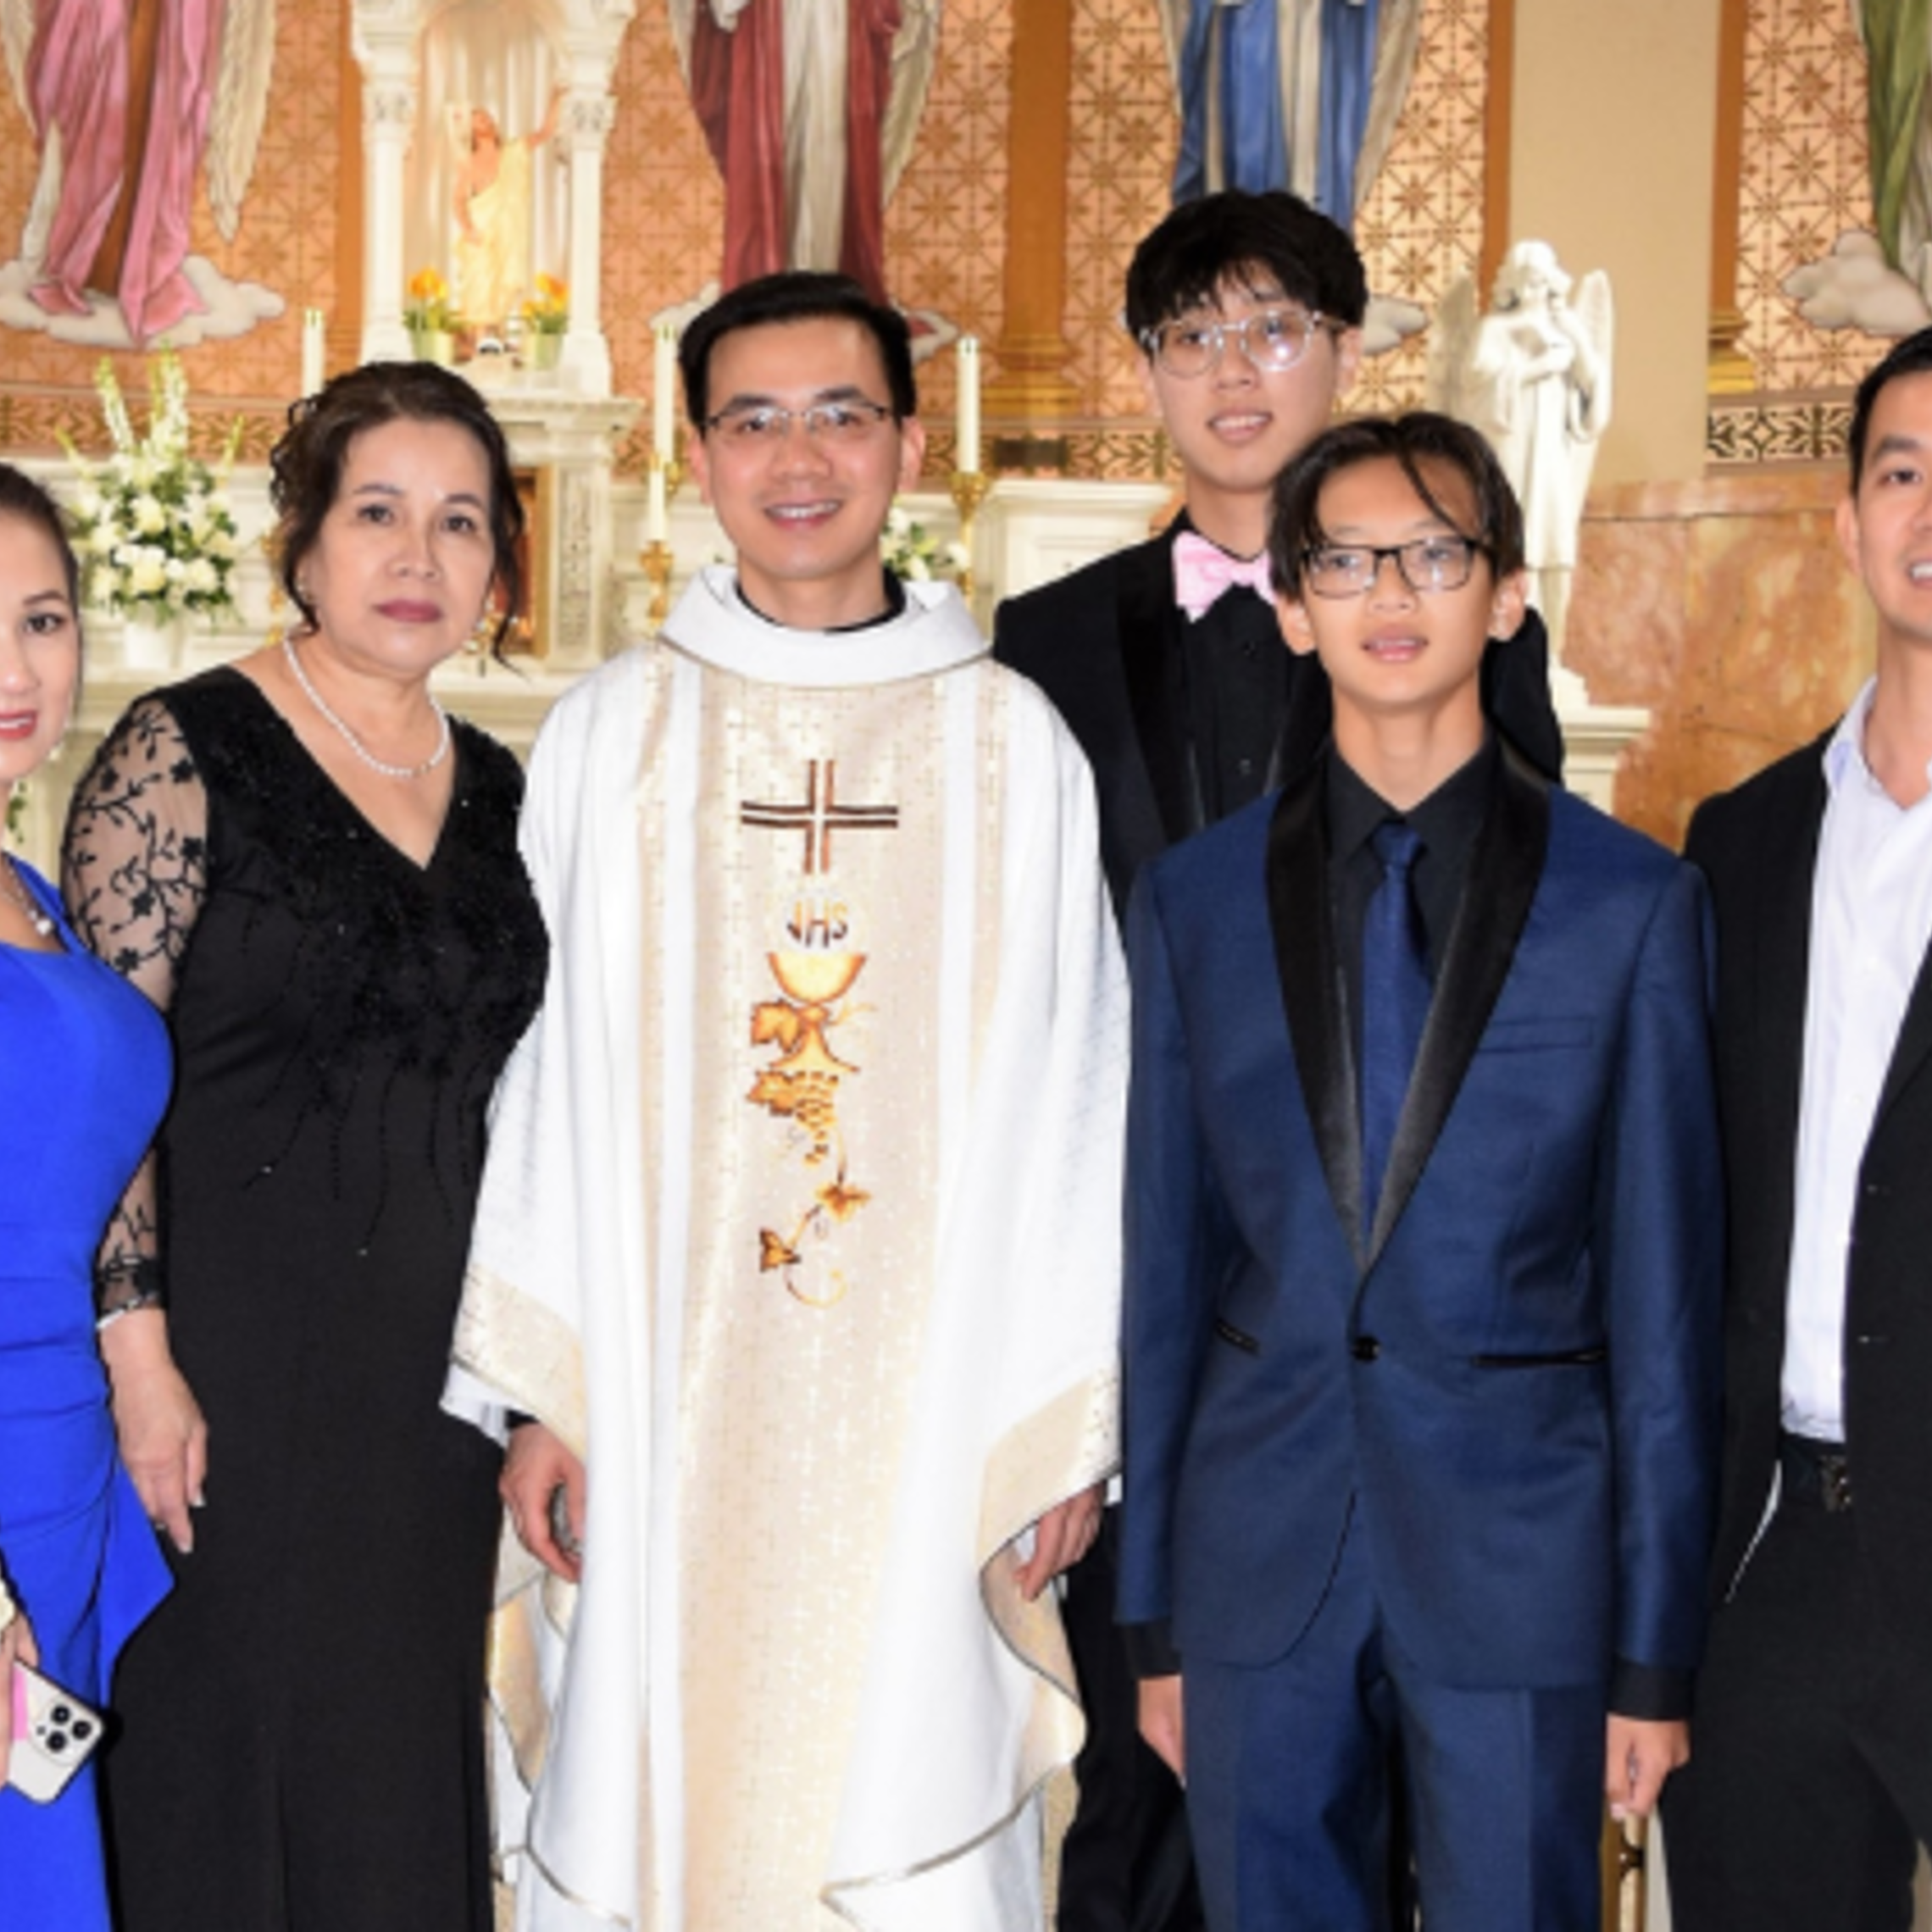 Newly ordained Fr. Ky Nguyen, SDB, and his family